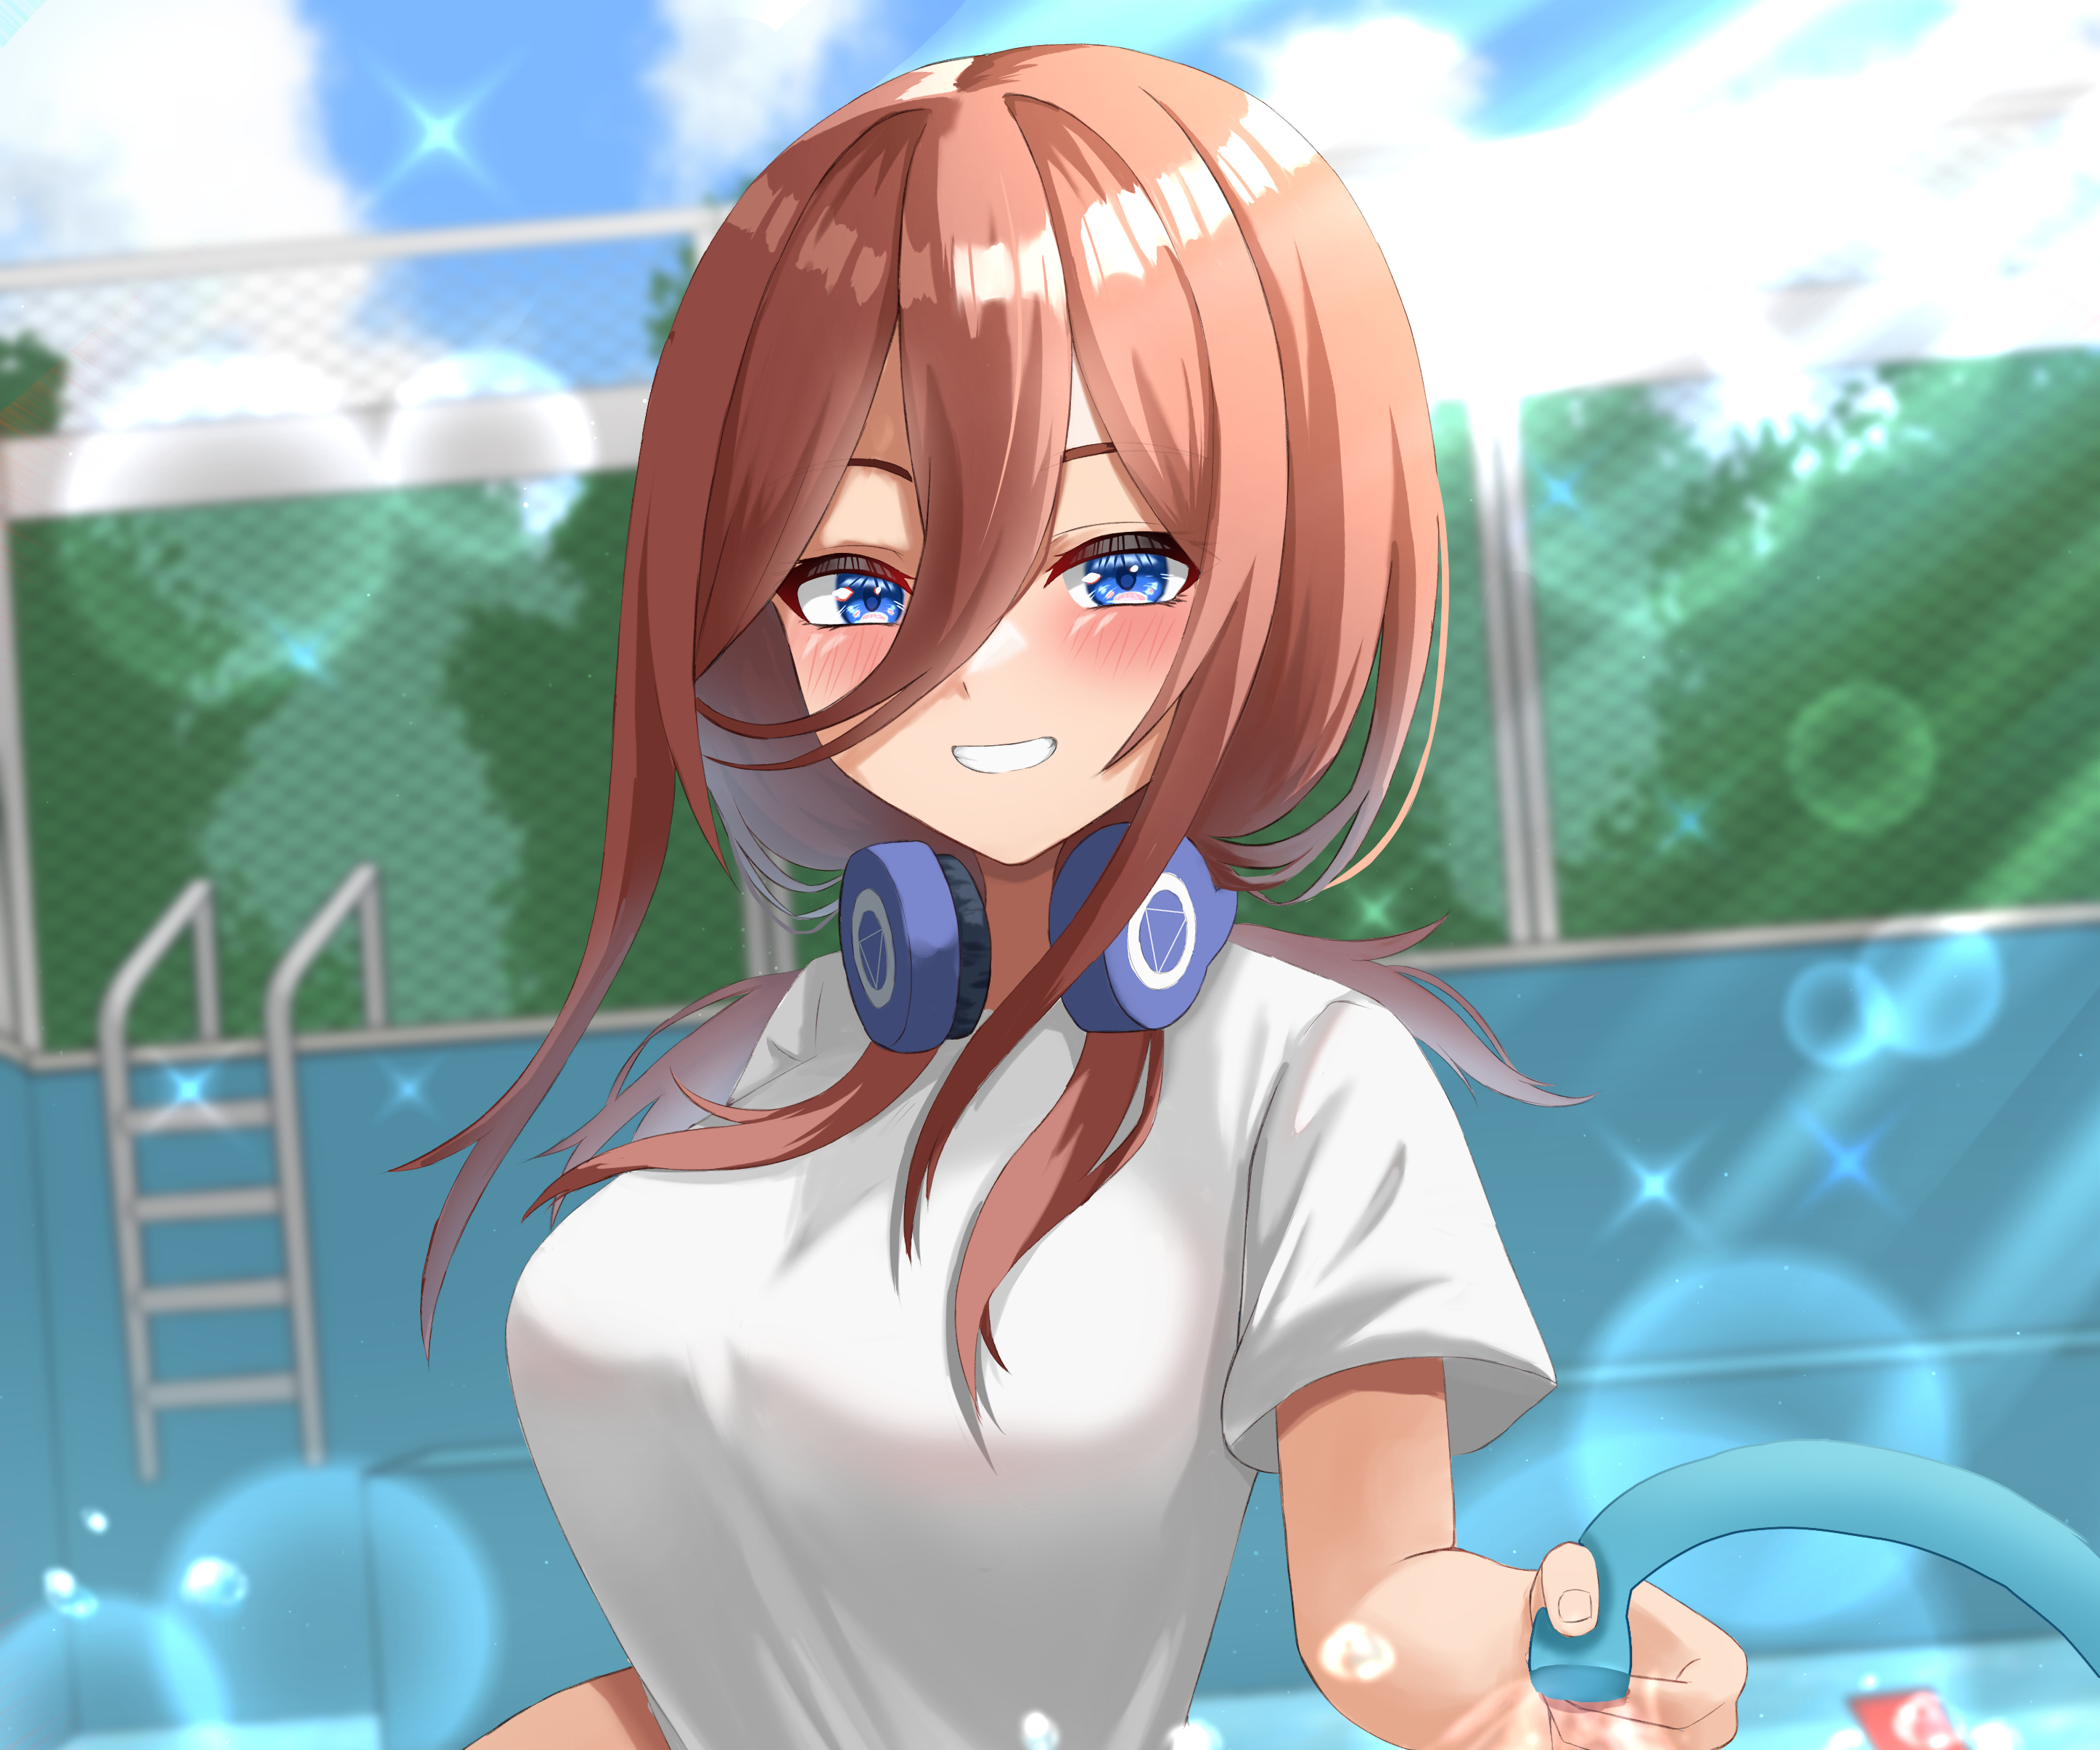 The Quintessential Quintuplets HD Wallpaper by カガヤ∞